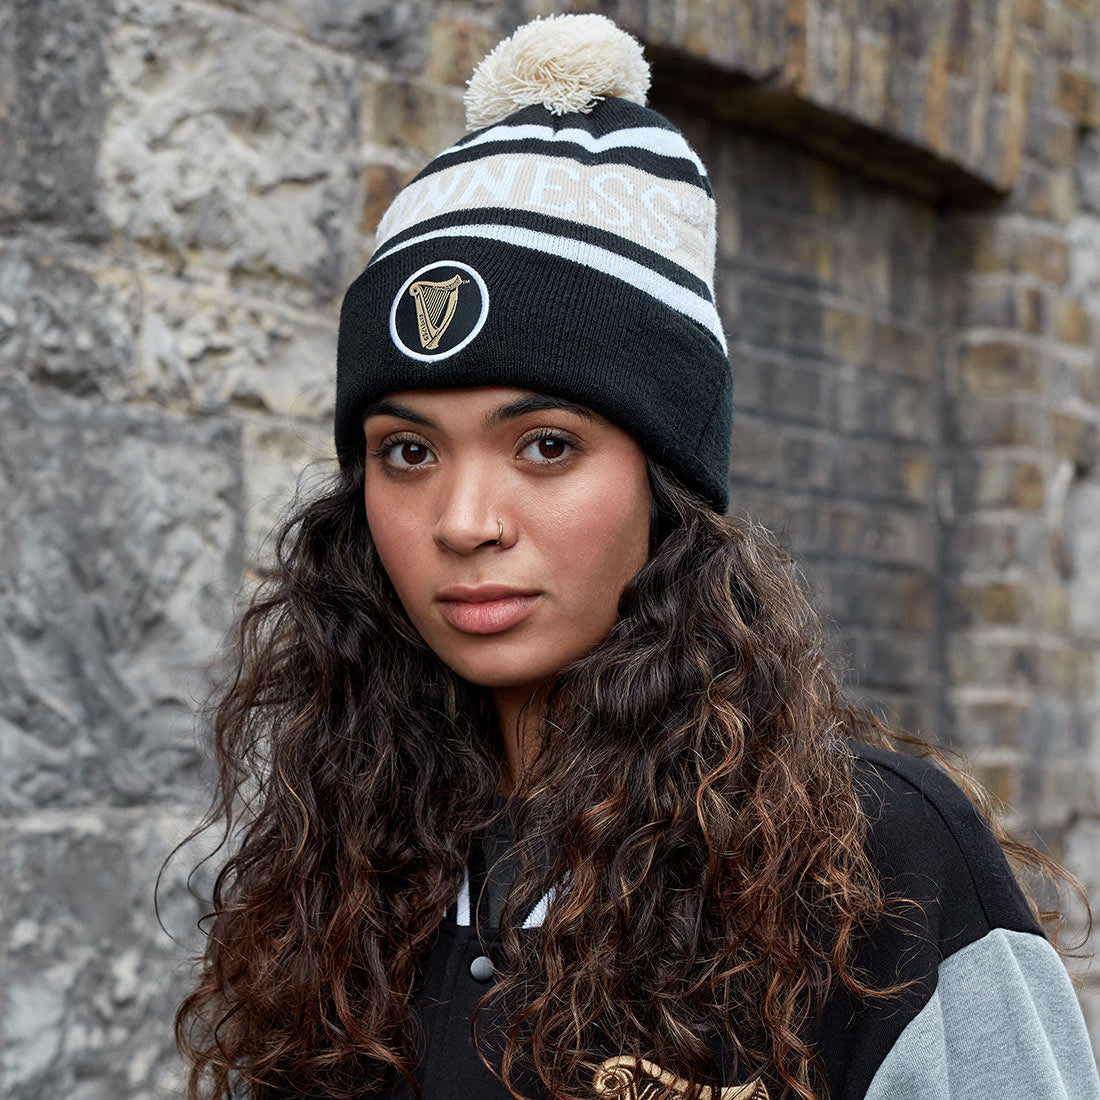 A young woman wearing a Guinness Black and White Premium Beanie, cozy with the Ireland flag on it.